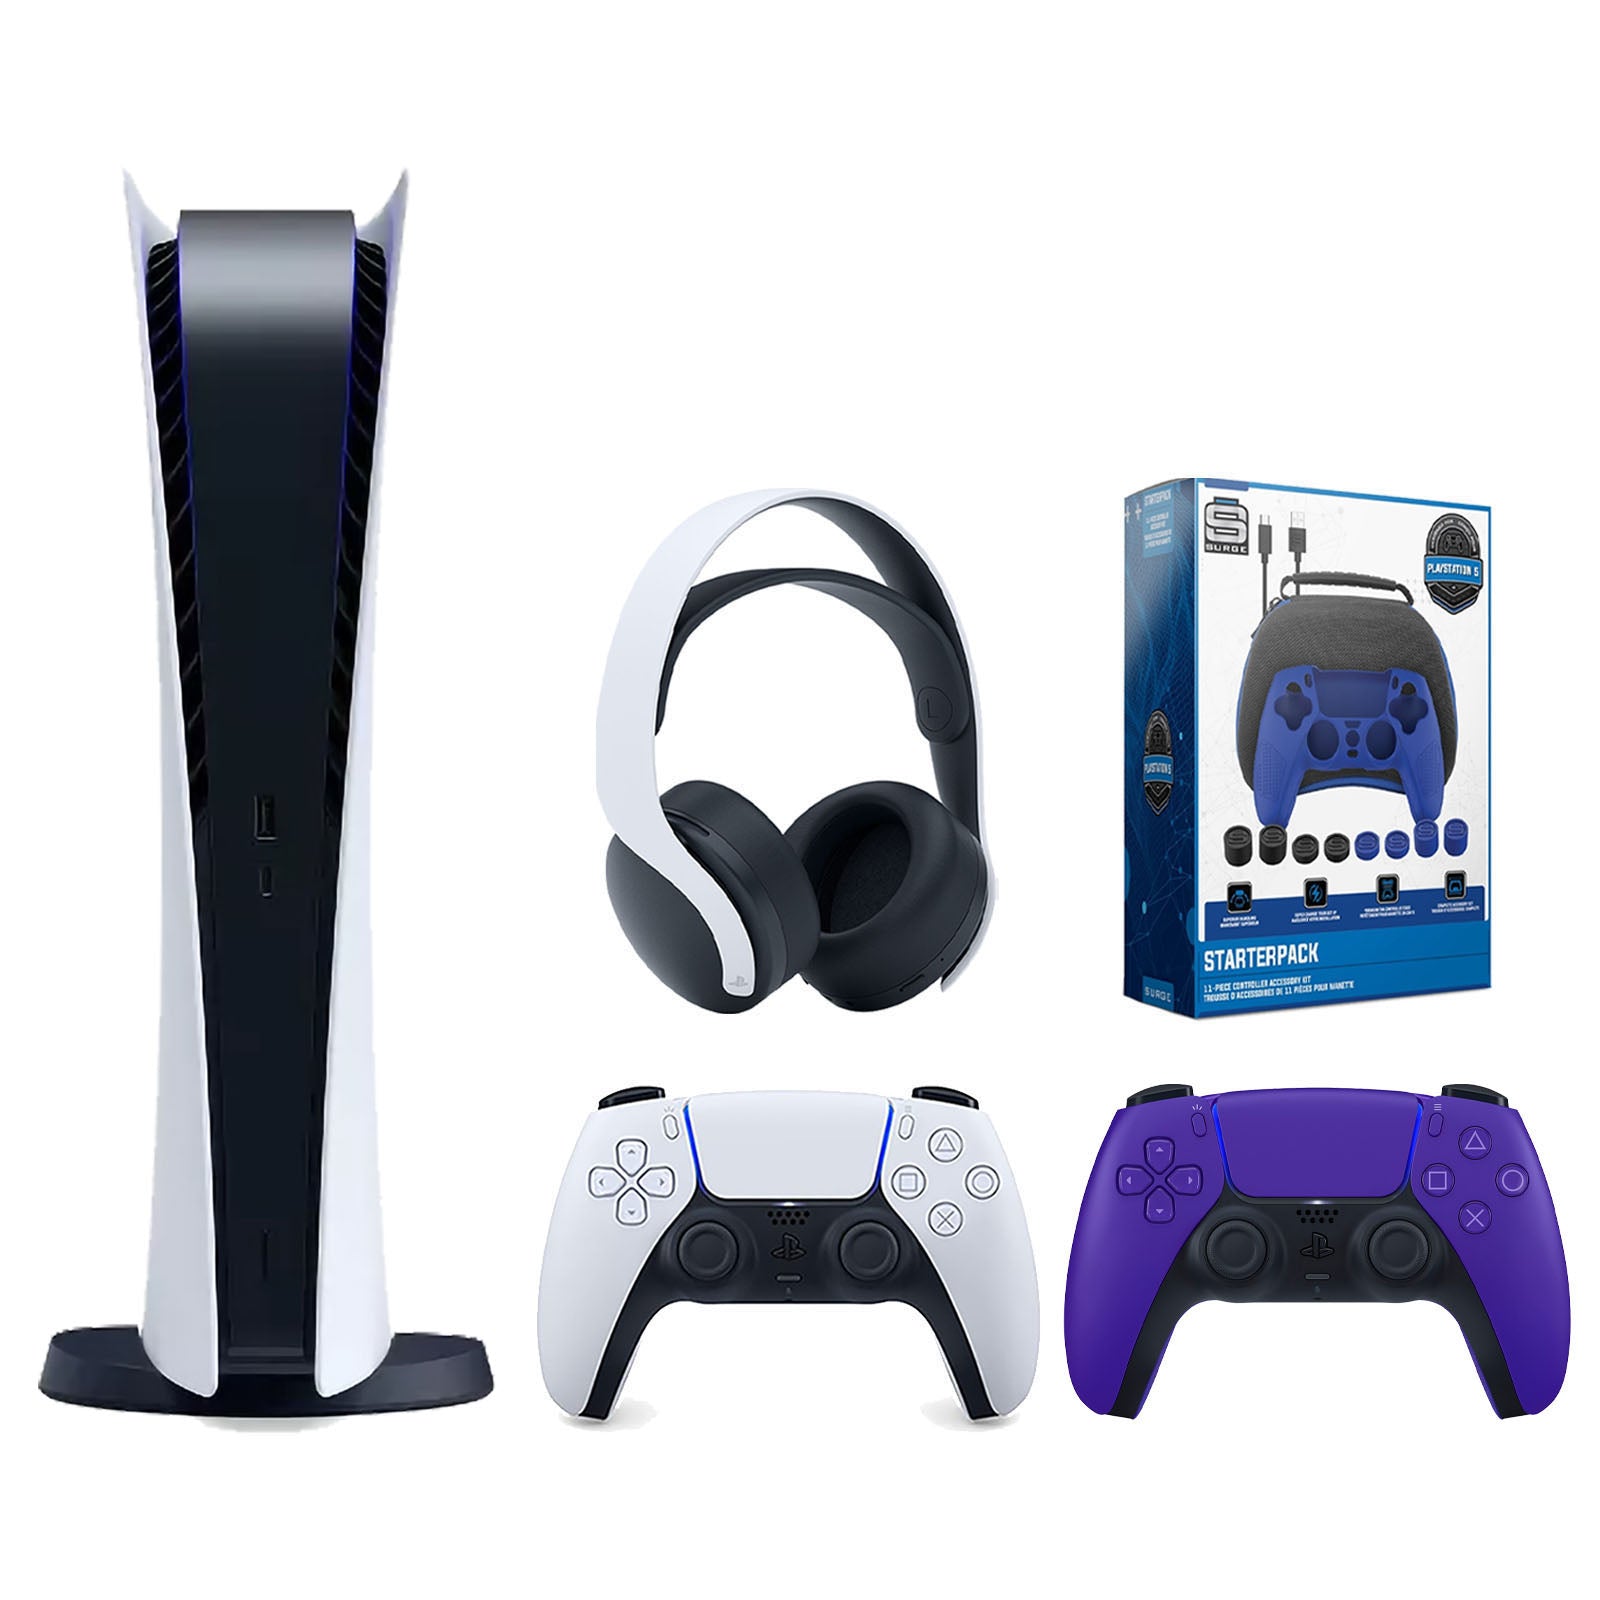 Sony Playstation 5 Digital Edition Console with Extra Purple Controller, White PULSE 3D Headset and Surge Pro Gamer Starter Pack 11-Piece Accessory Bundle - Pro-Distributing